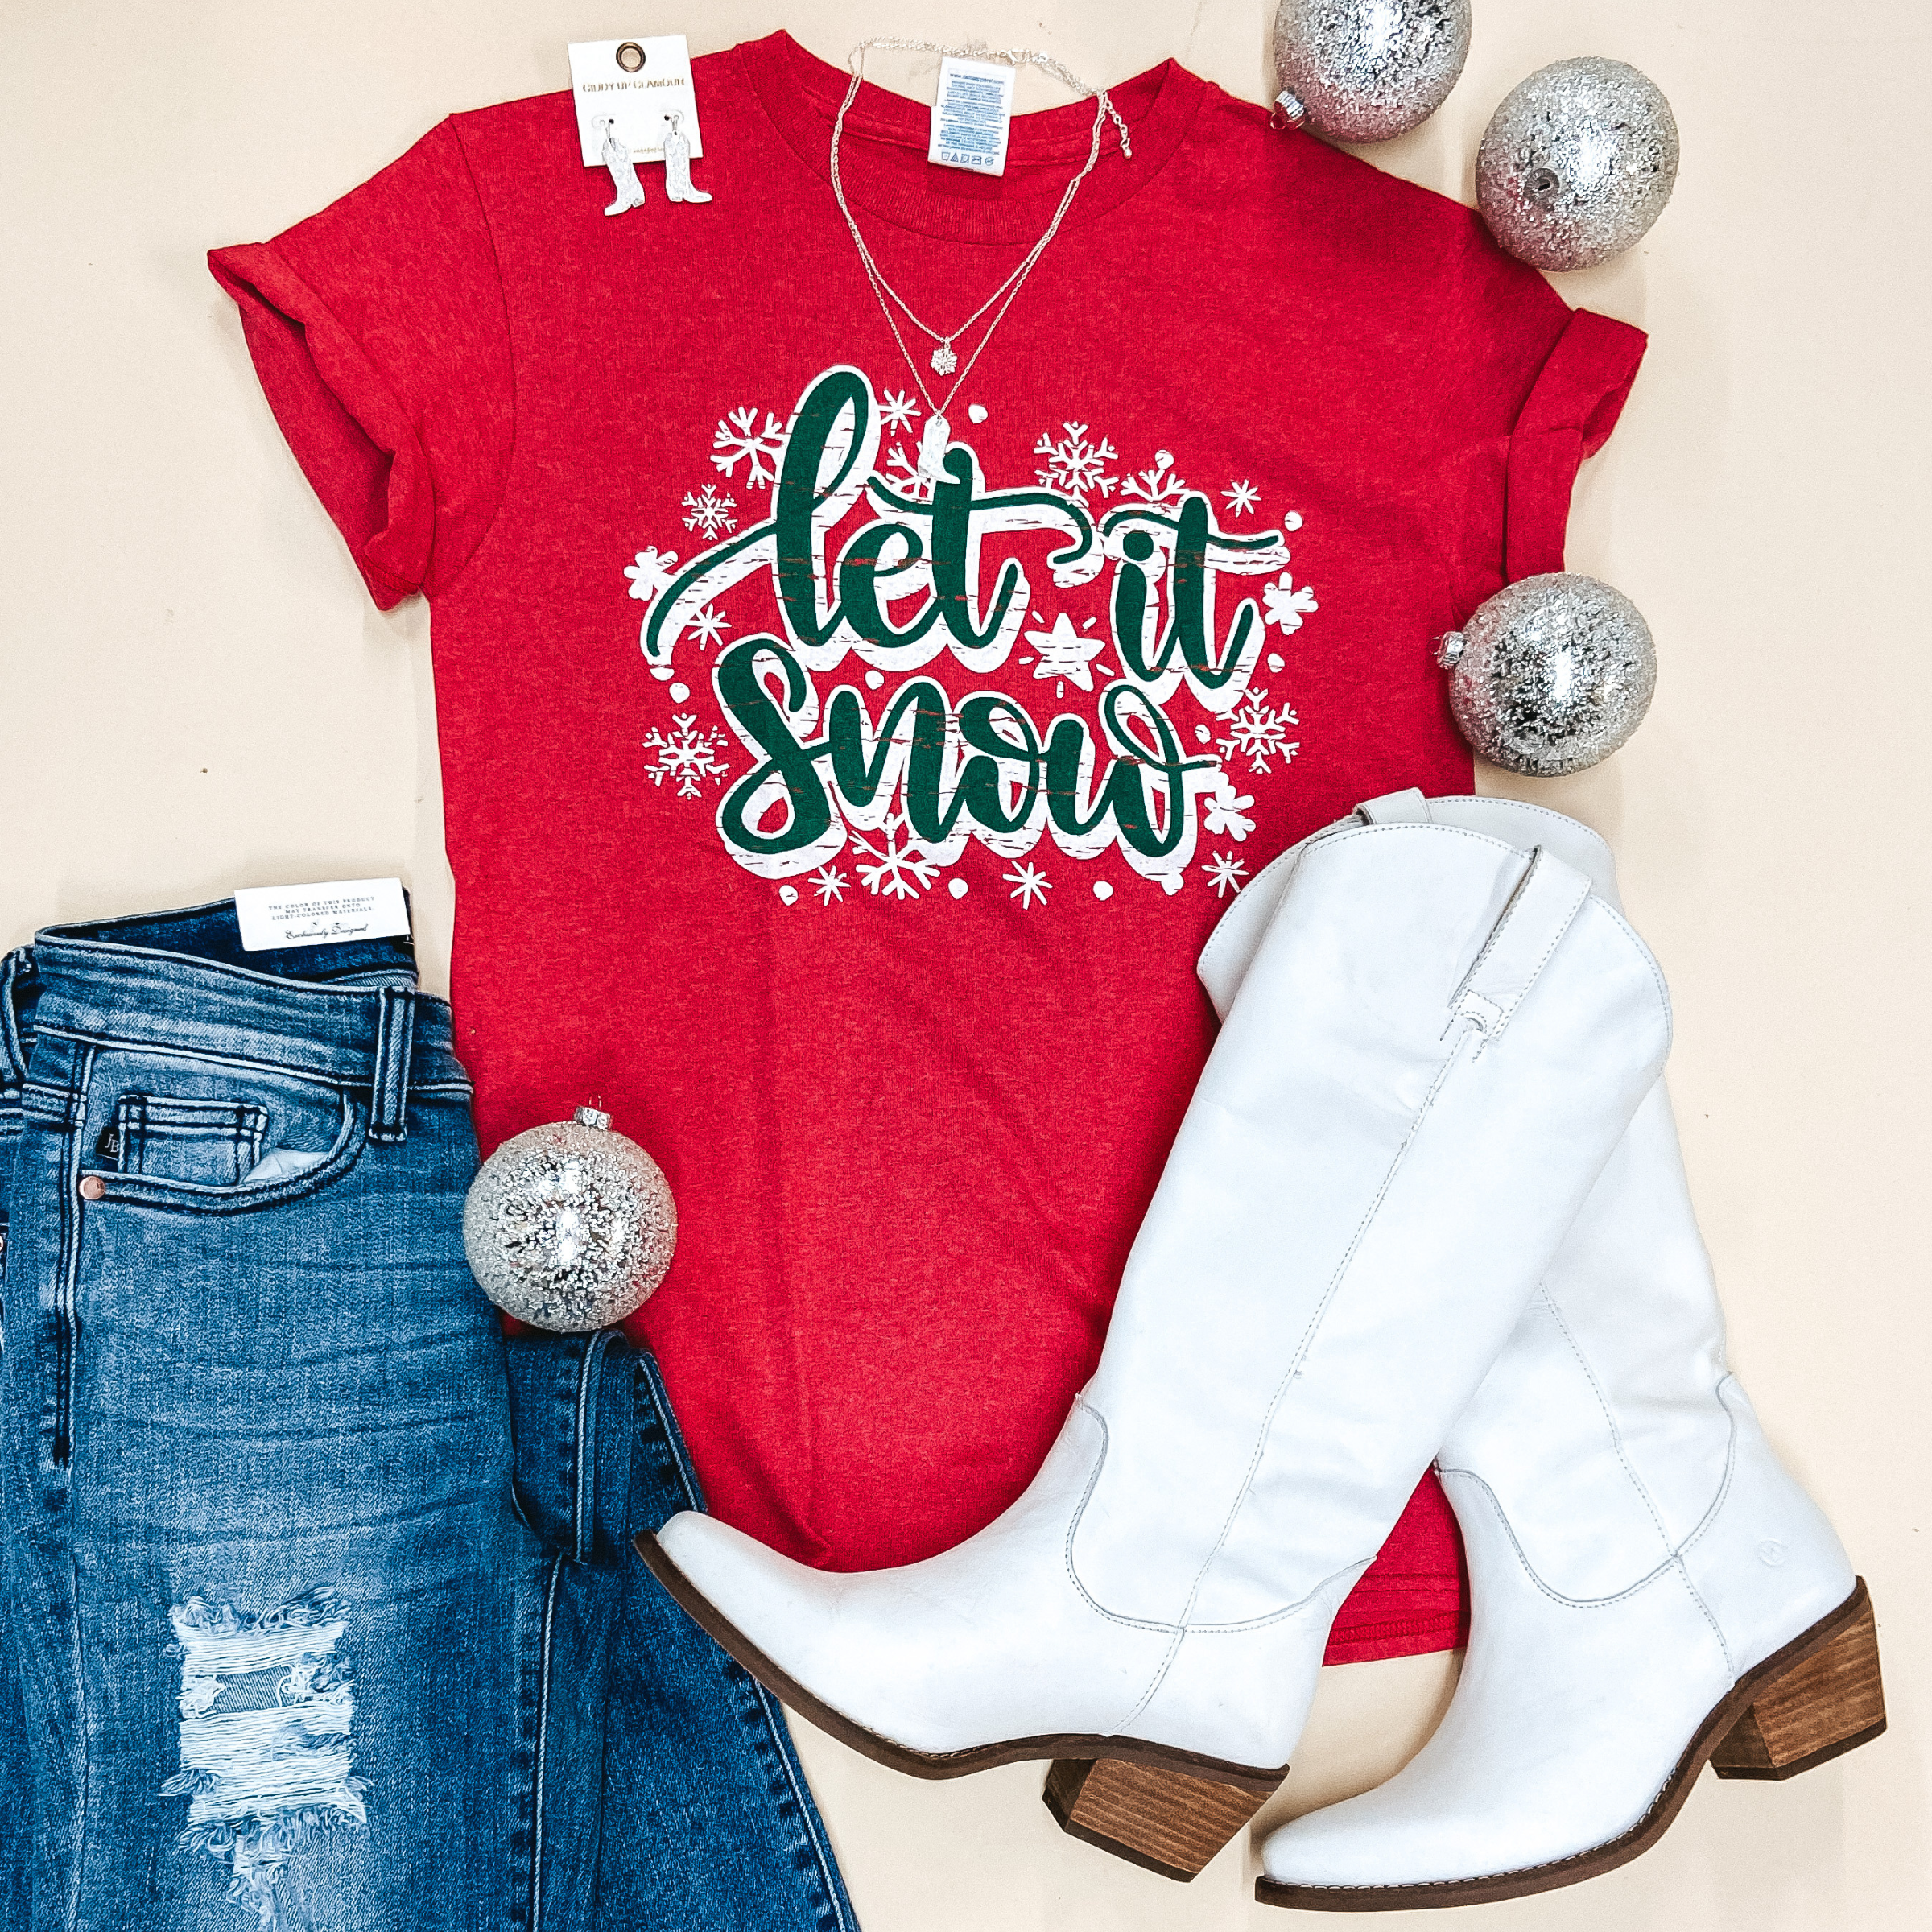 A red short sleeve tee shirt with a crew neckline and graphic that says "Let It Snow" in green lettering with snowflakes around. Pictured on a white background with distressed jeans, white jewelry, and white boots.